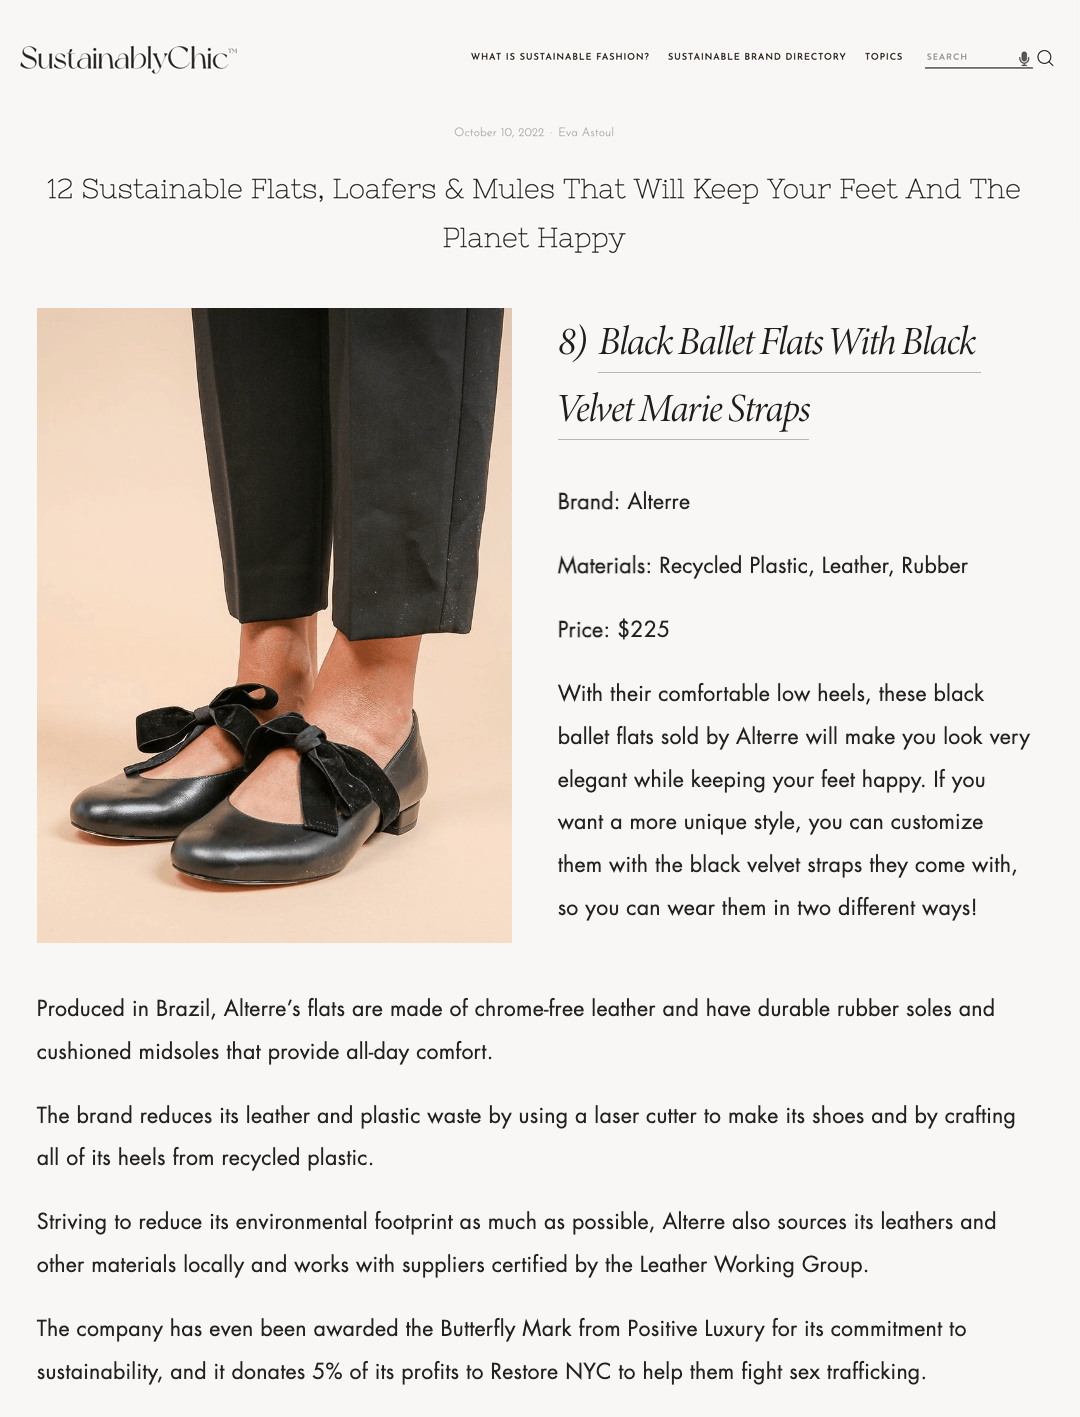 Sustainably Chic Digital Feature, customizable ballet flats Alterre